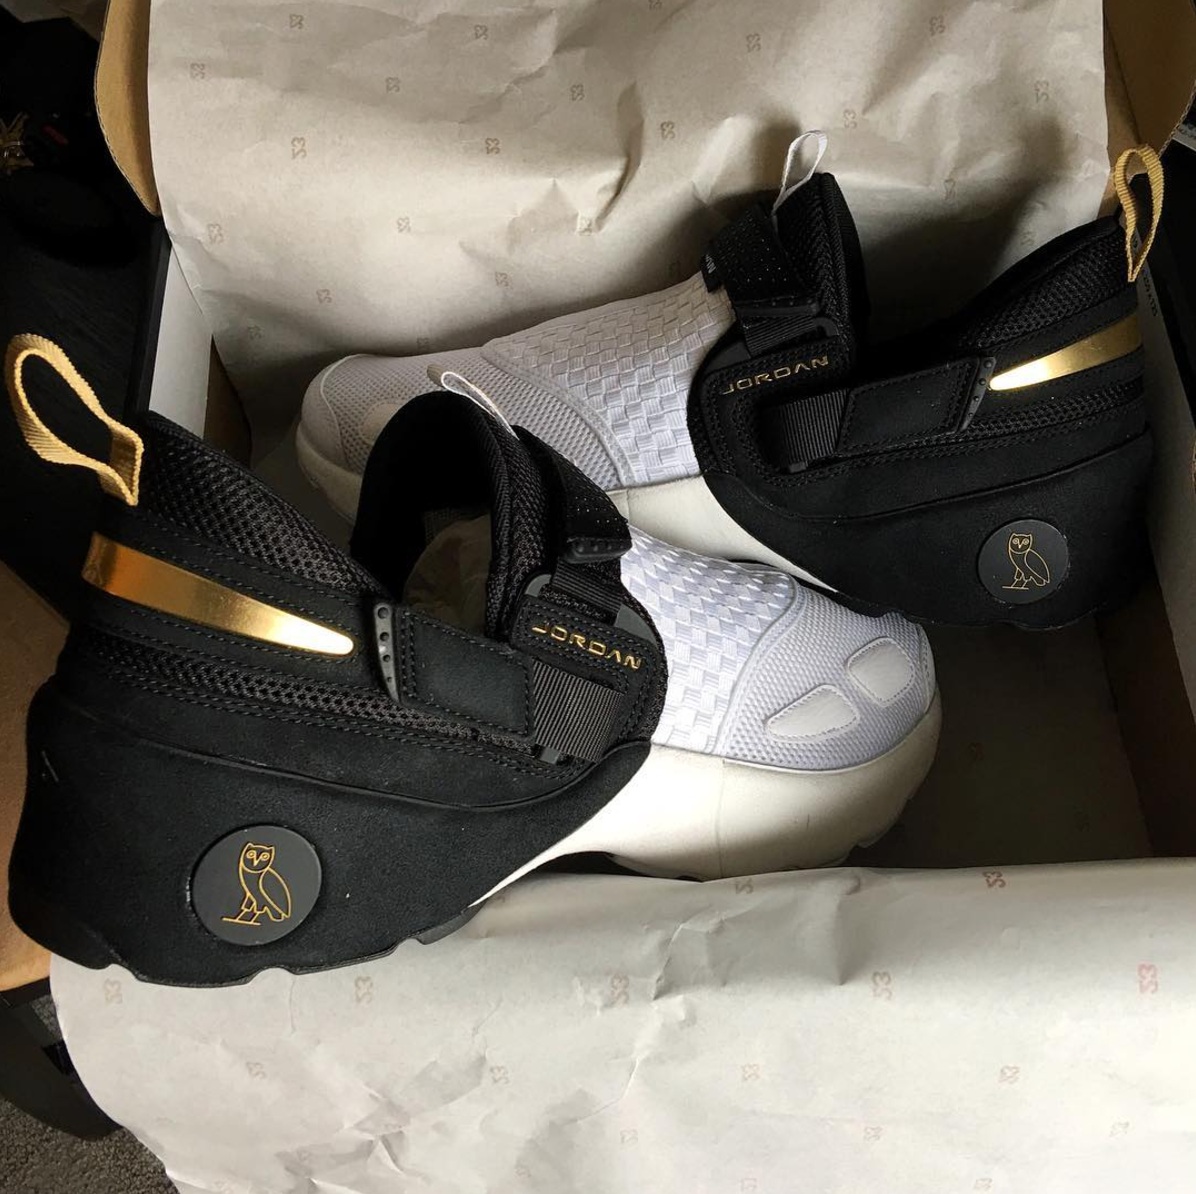 Drake’s OVO Brand Drops Exclusive Sneaker for the Jordan Brand Store Opening in Toronto